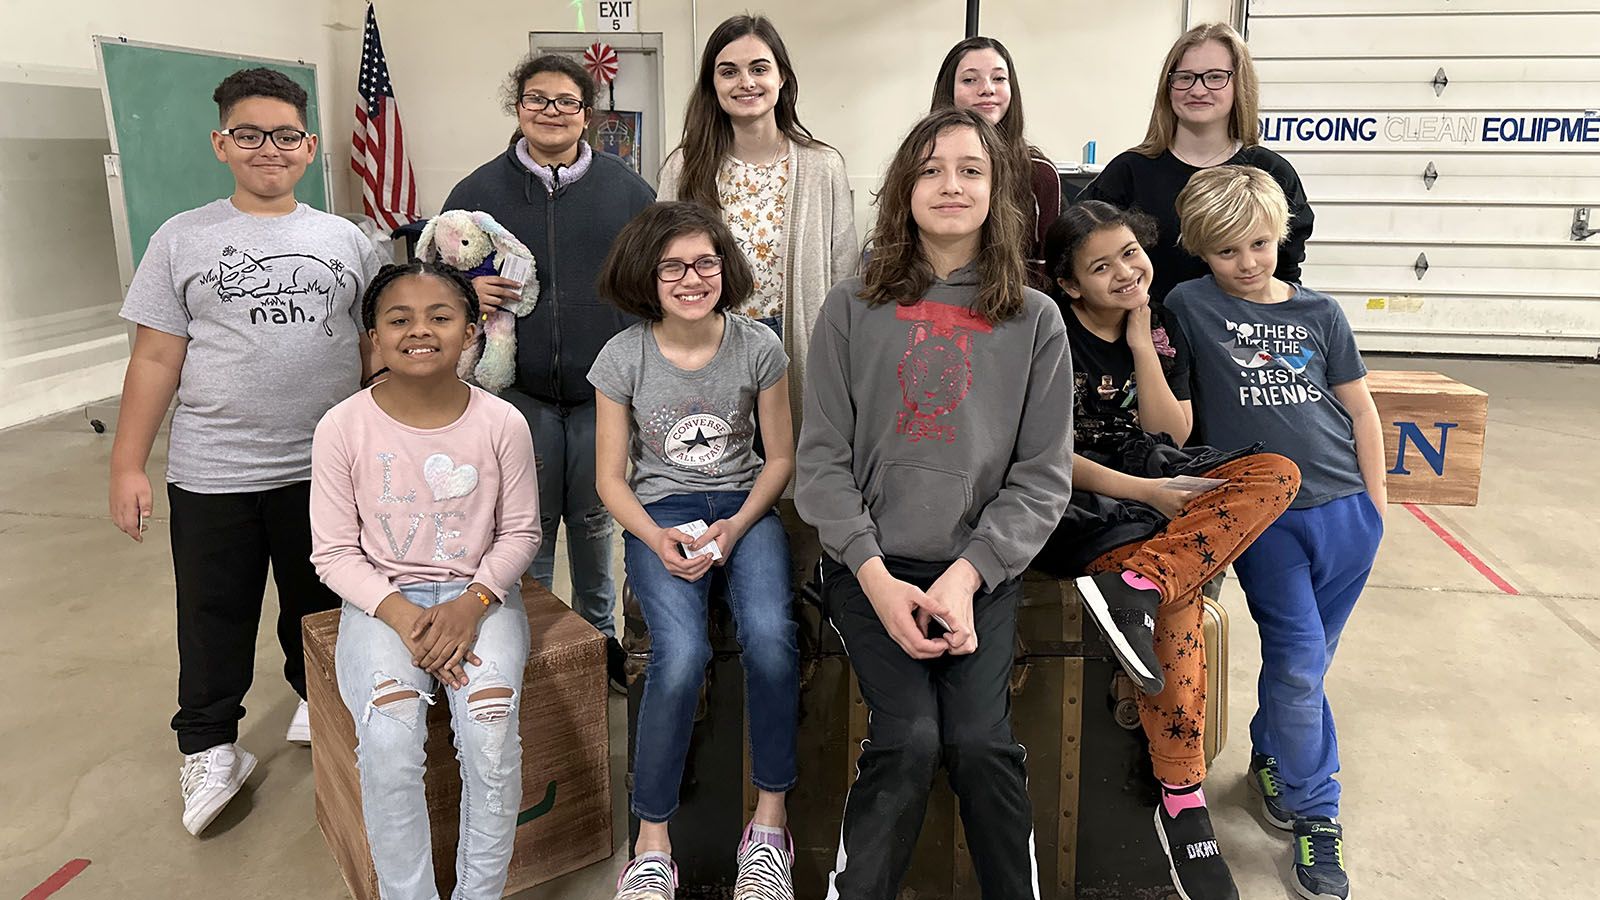 Fort Wayne Youtheatre’s Aesop’s Fables features neurodivergent and neurotypical actors. The cast includes, front from left, Aly Celaya, Sofia Brown, Bayani Spradling, Amya Howell, and Sam Chrzan; and back from left, Jaiden Littlejohn, Unique Keairnes, Lydia Moran, Chloe Zuehsow, and Shae English. Not pictured: Olivia More and Max Casazza.